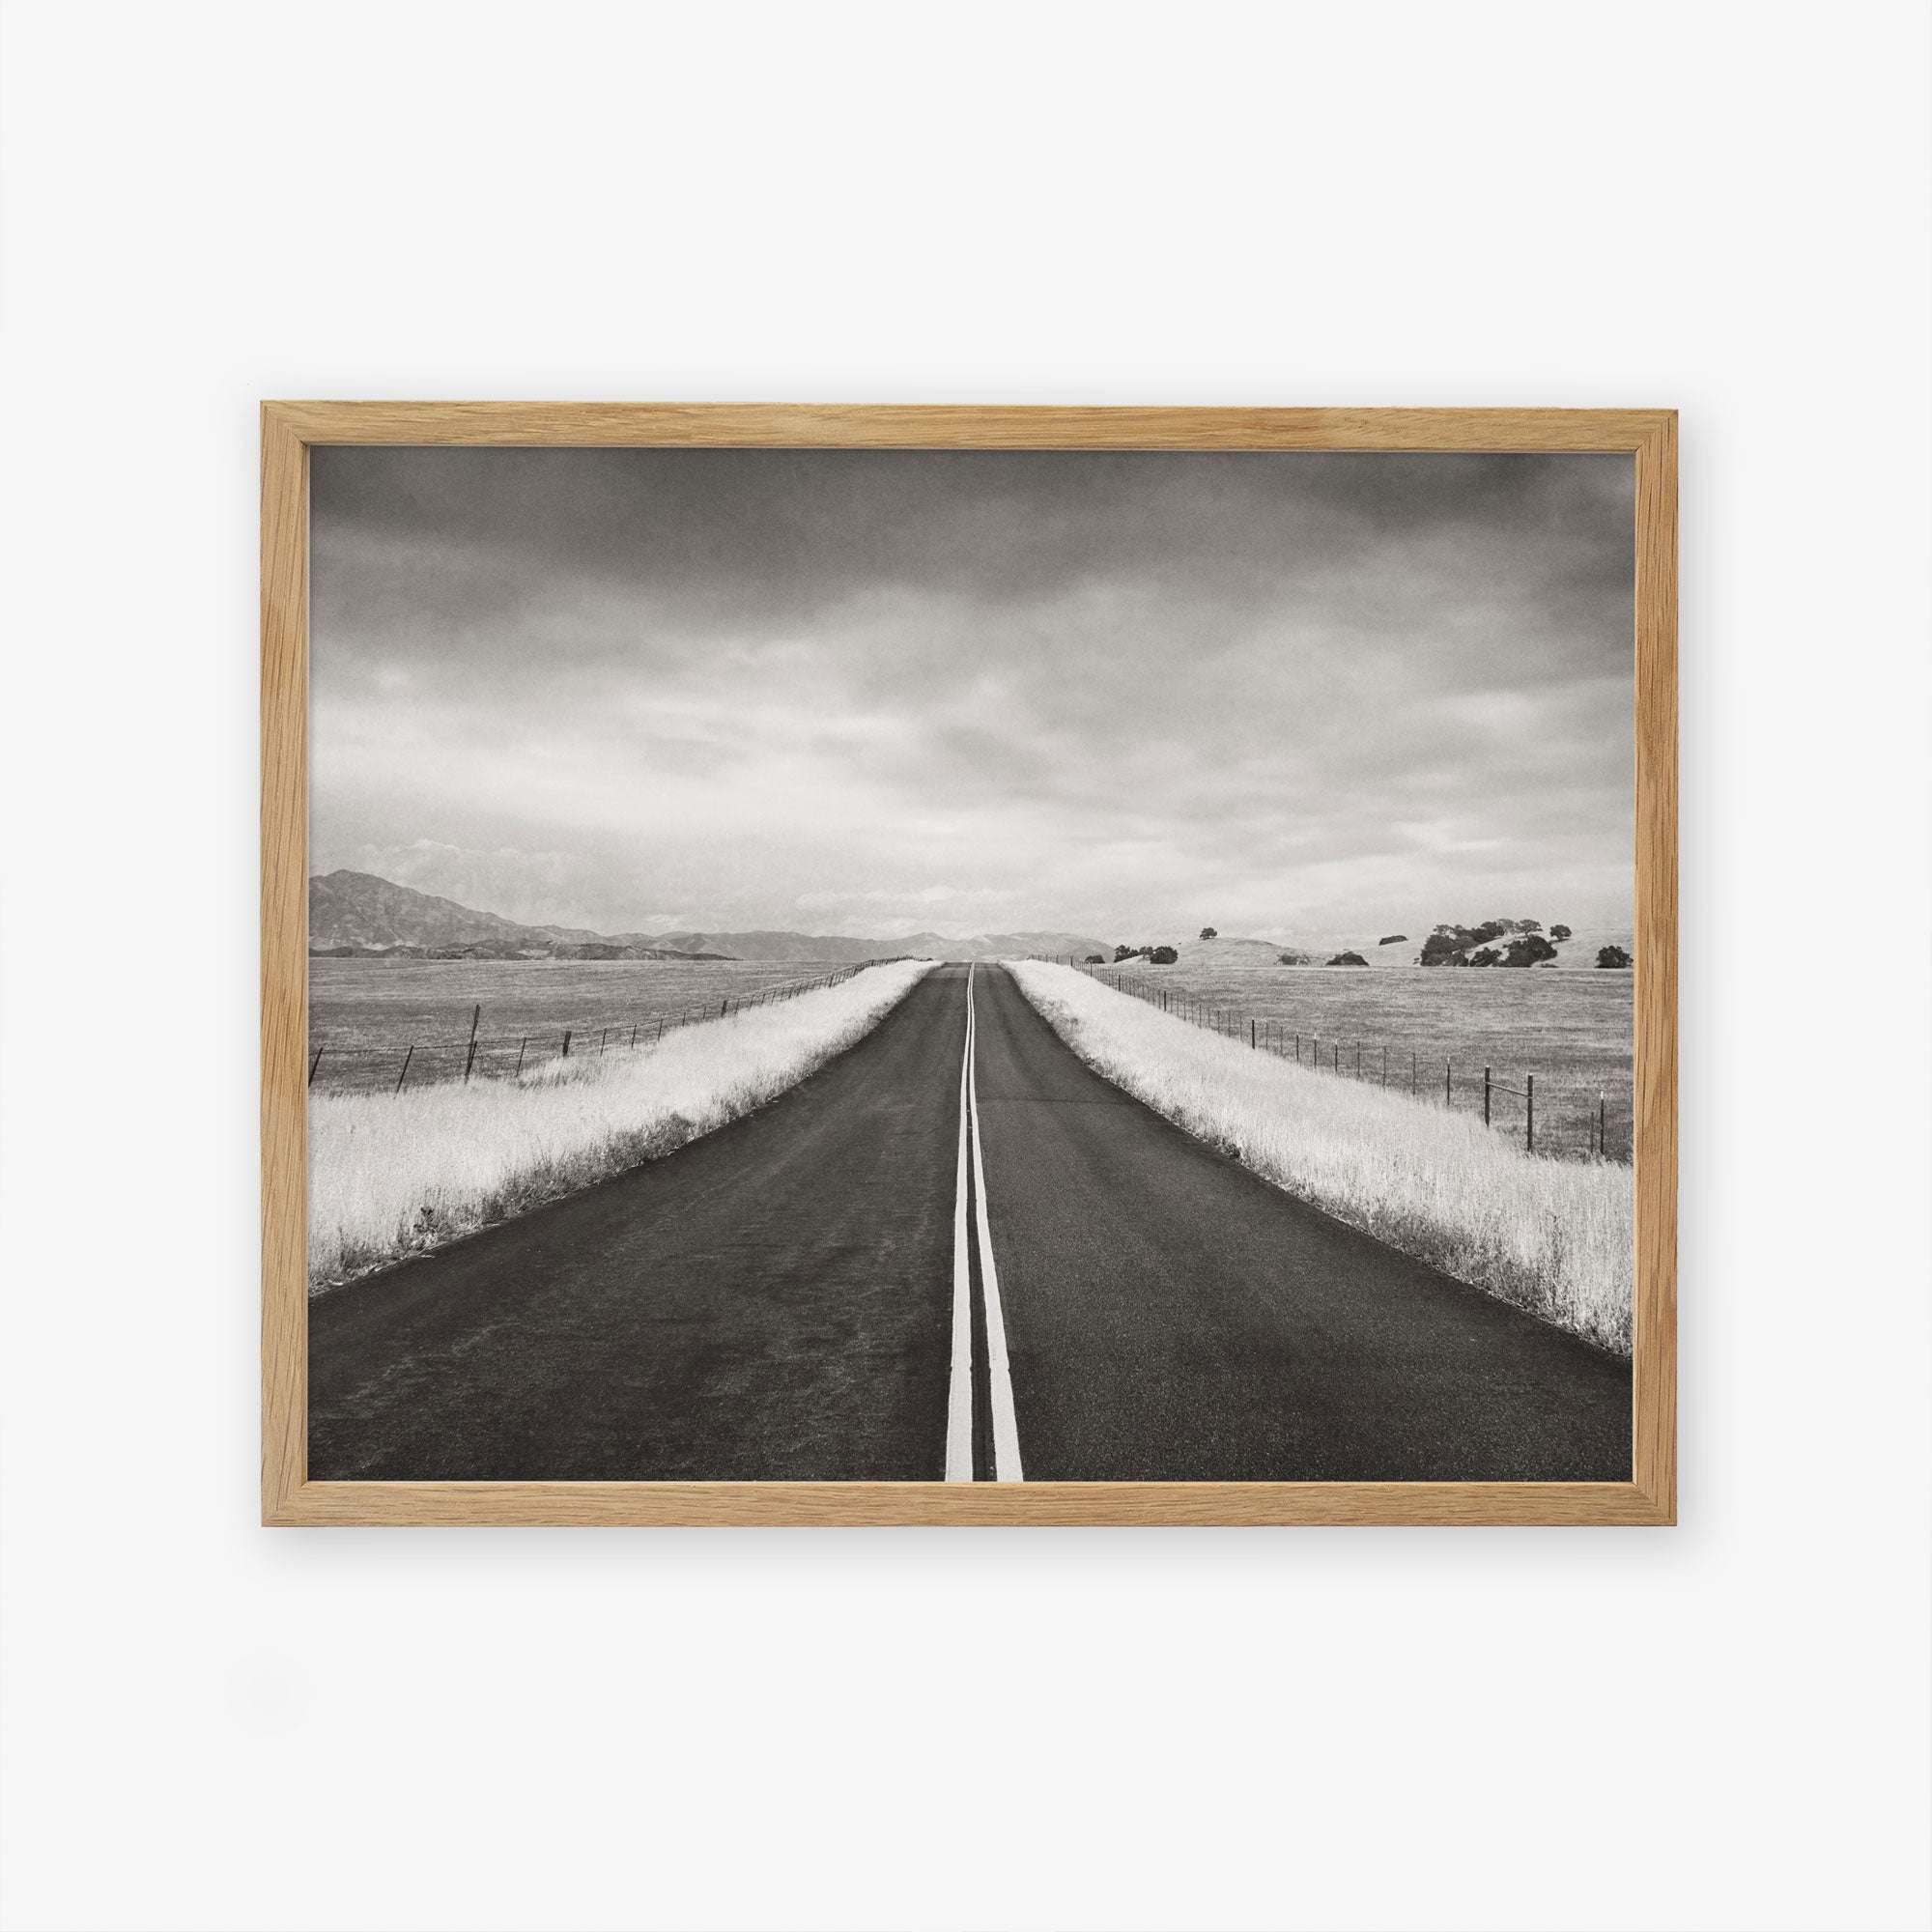 A framed Offley Green black and white photograph on archival photographic paper of a straight road leading through a rural landscape with fenced fields and sparse trees under a cloudy sky, titled &#39;American Road Trip&#39;.